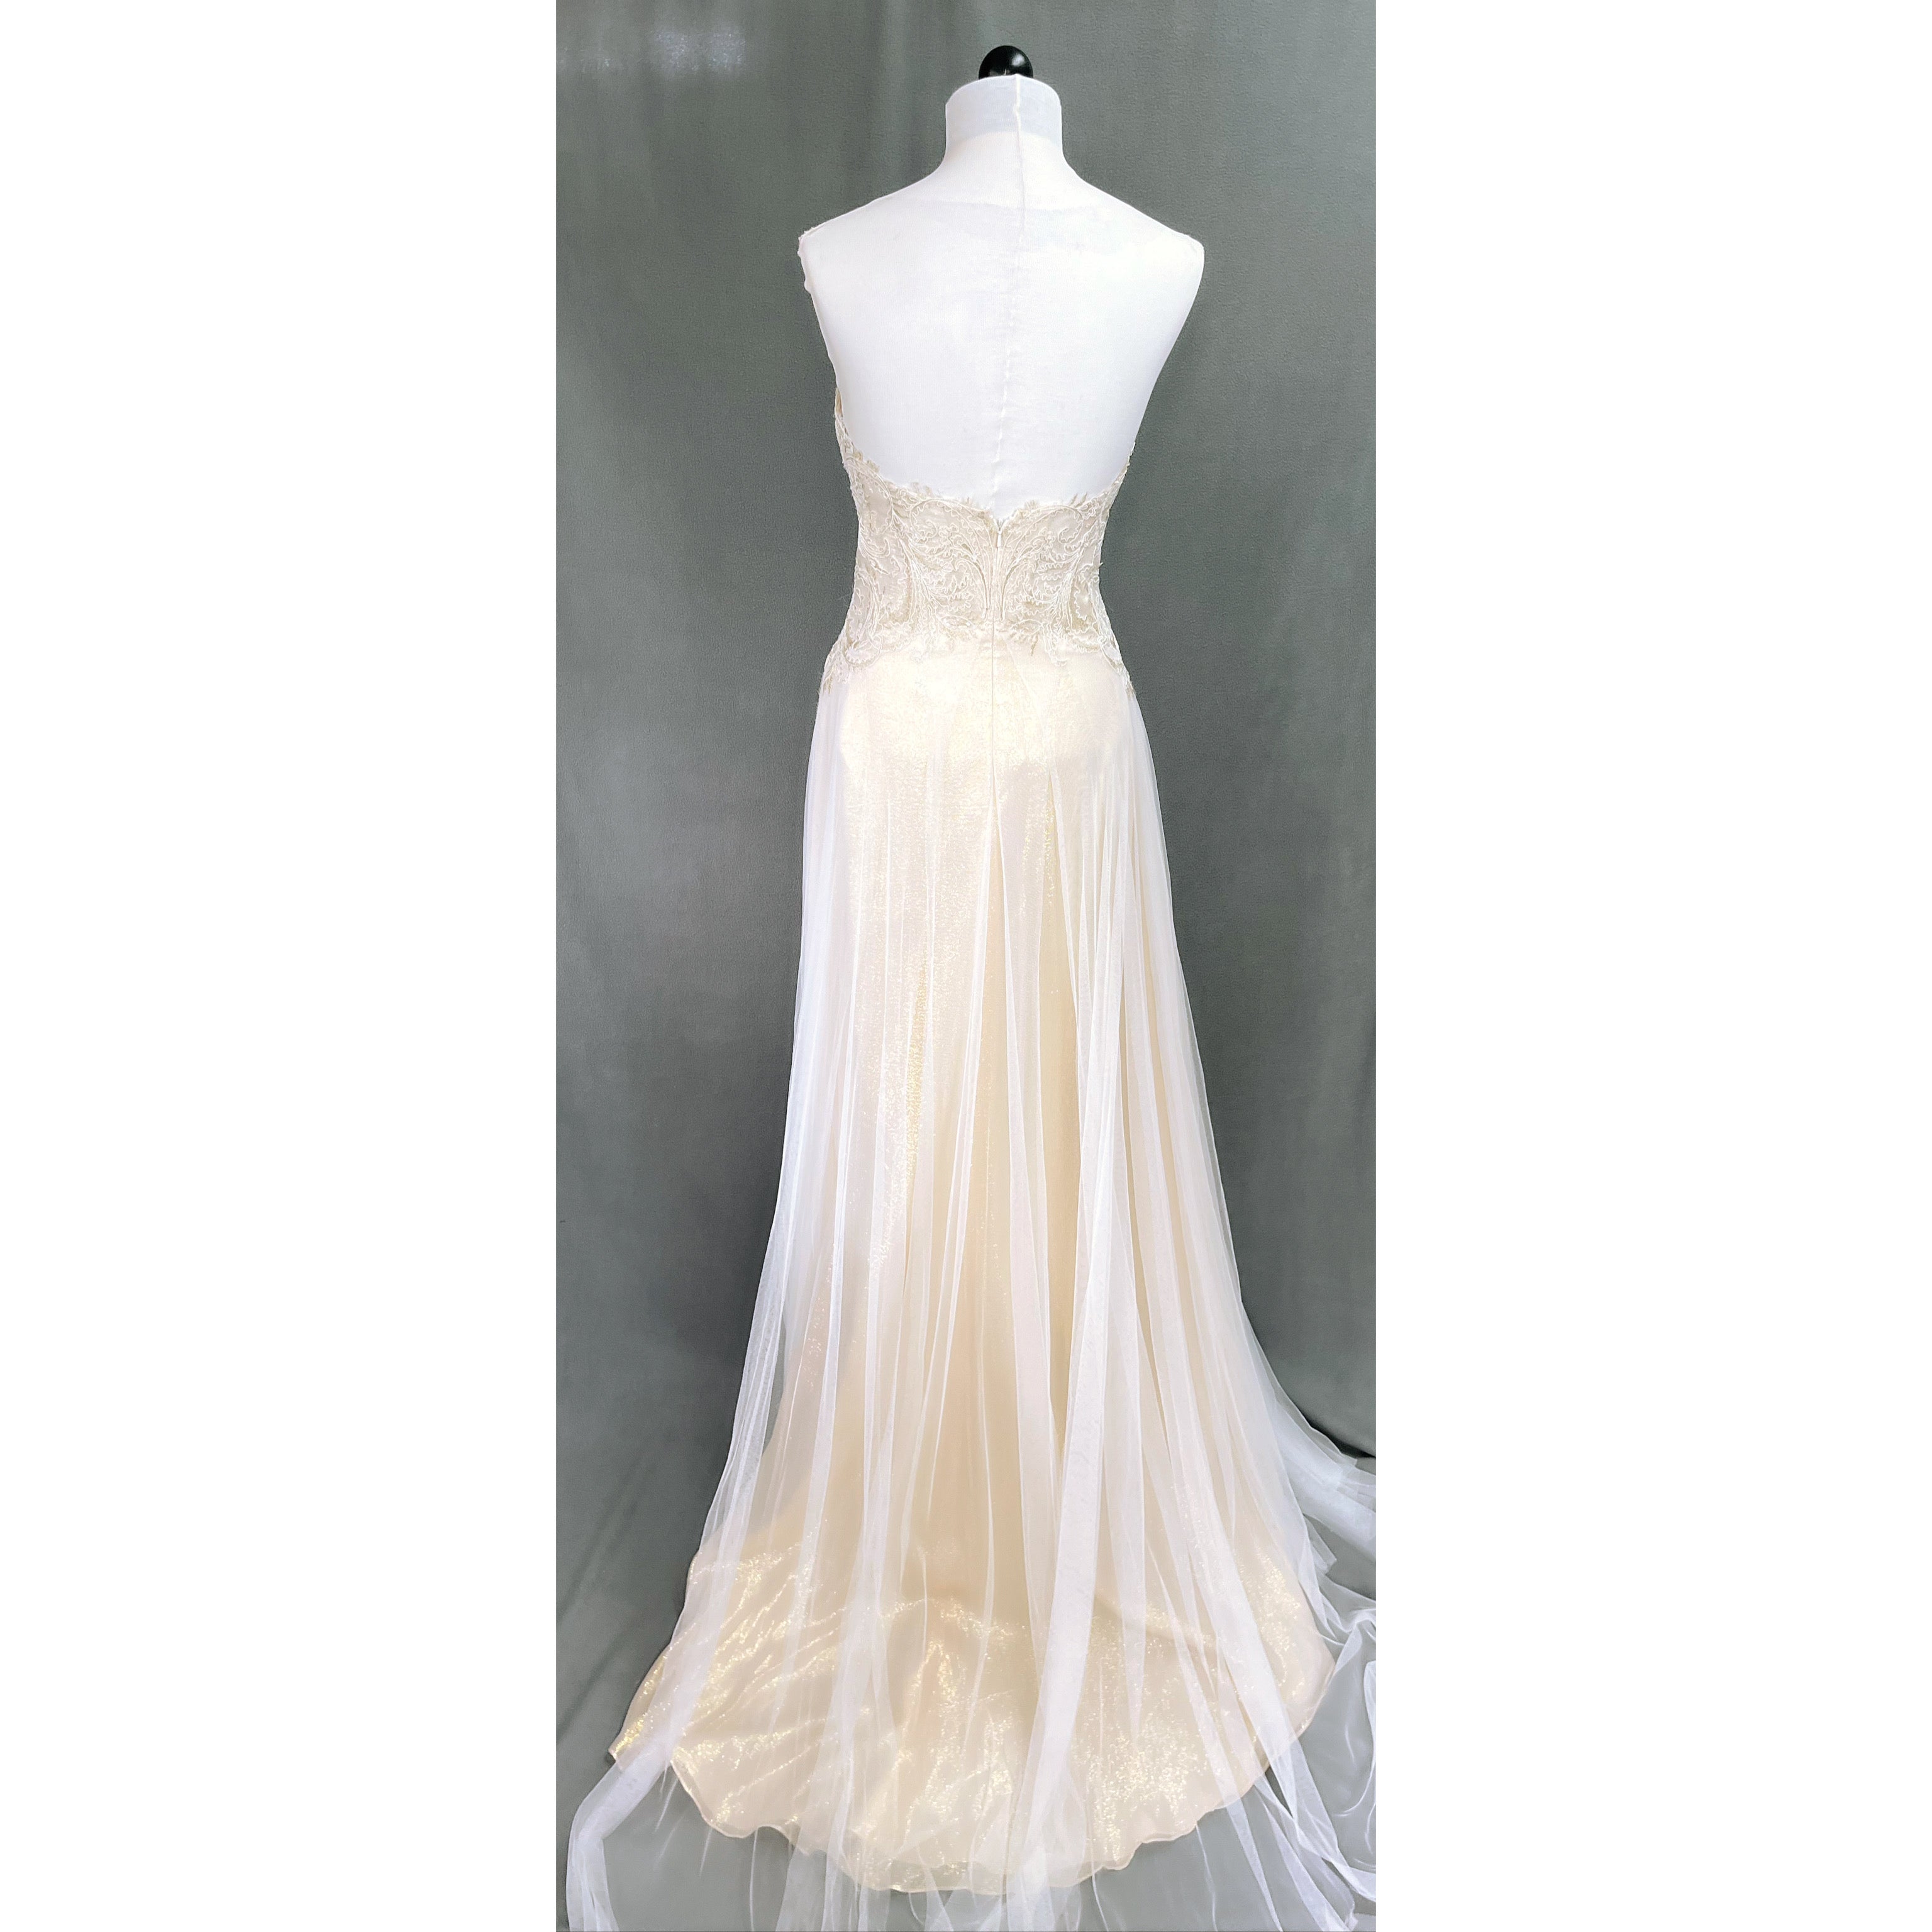 Love Marley gold and ivory dress, size 10